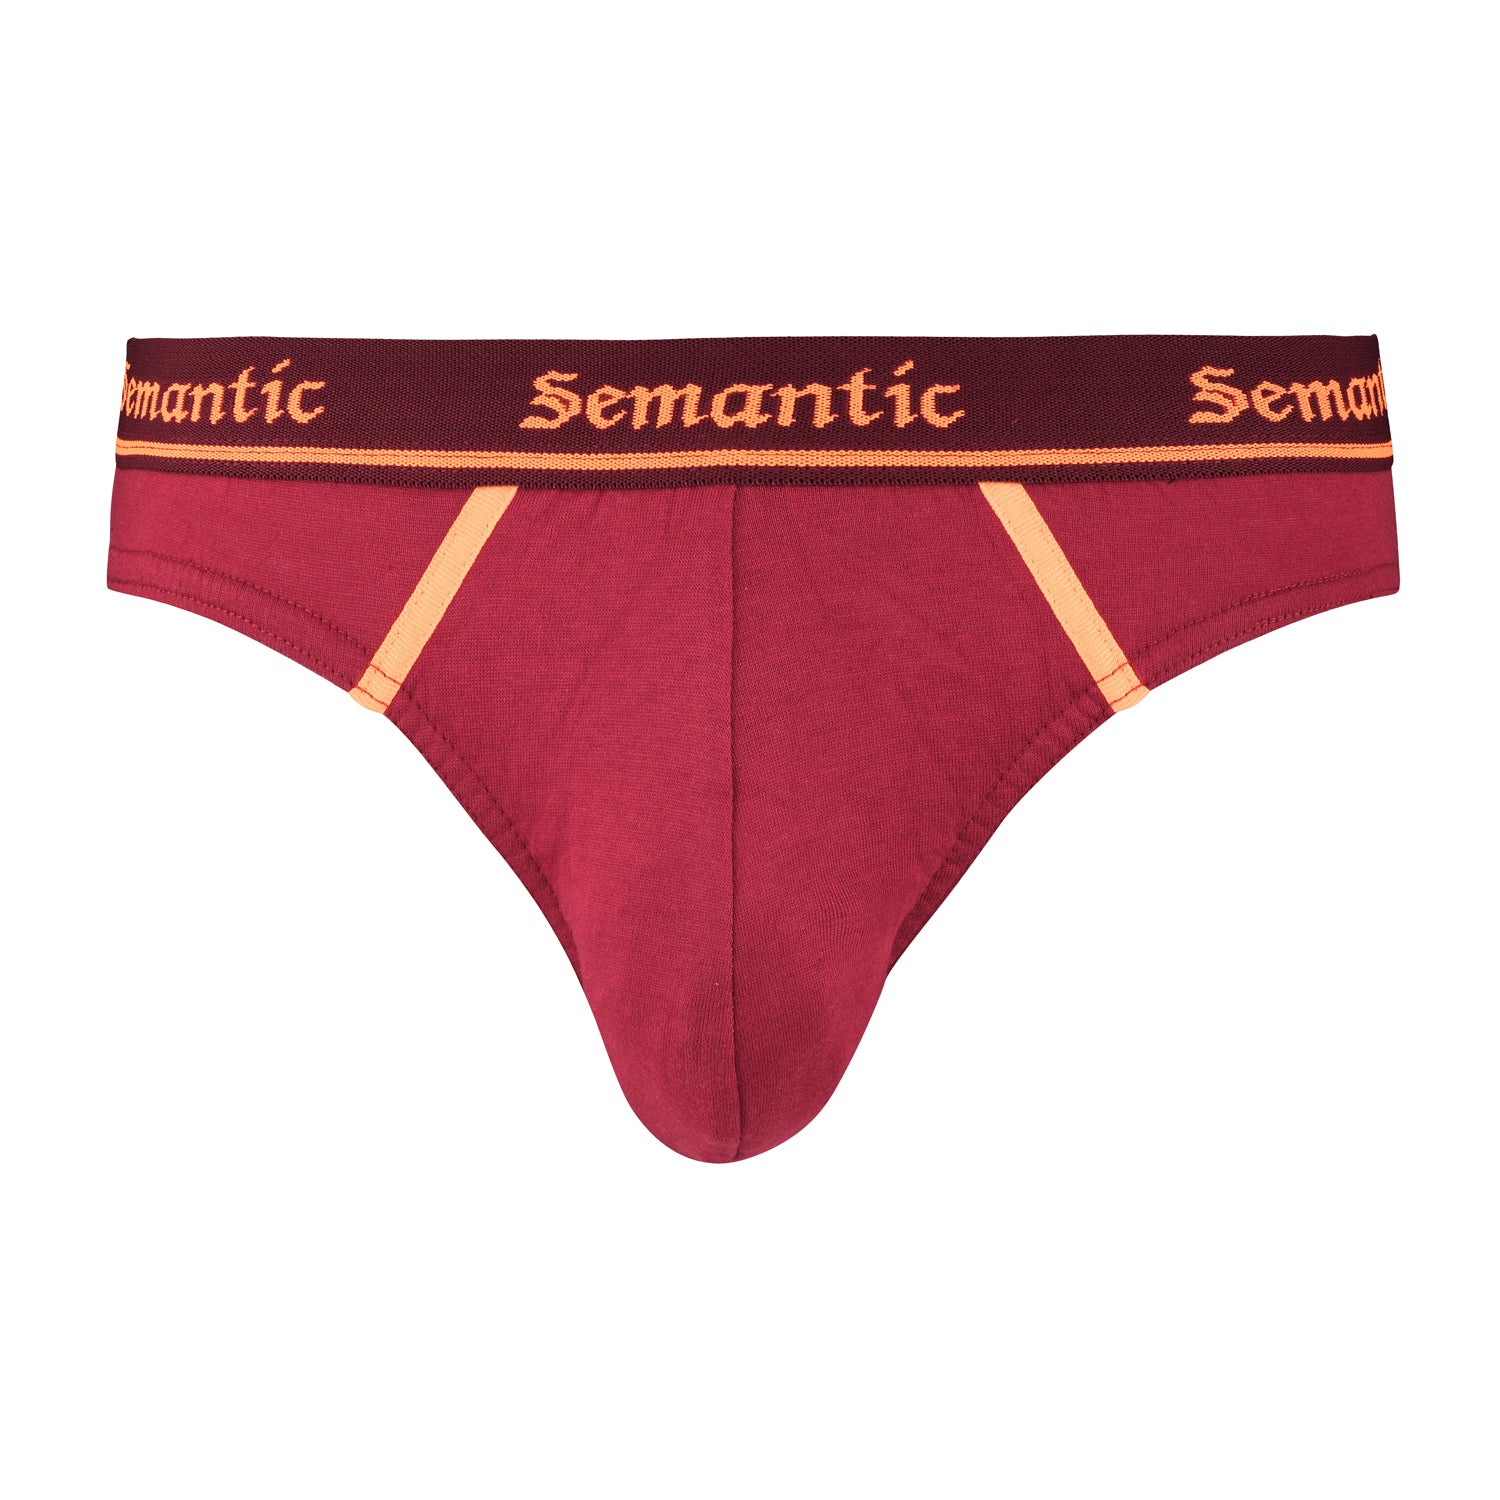 Semantic Cotton Briefs - Designer Waistband with Tape- Solid